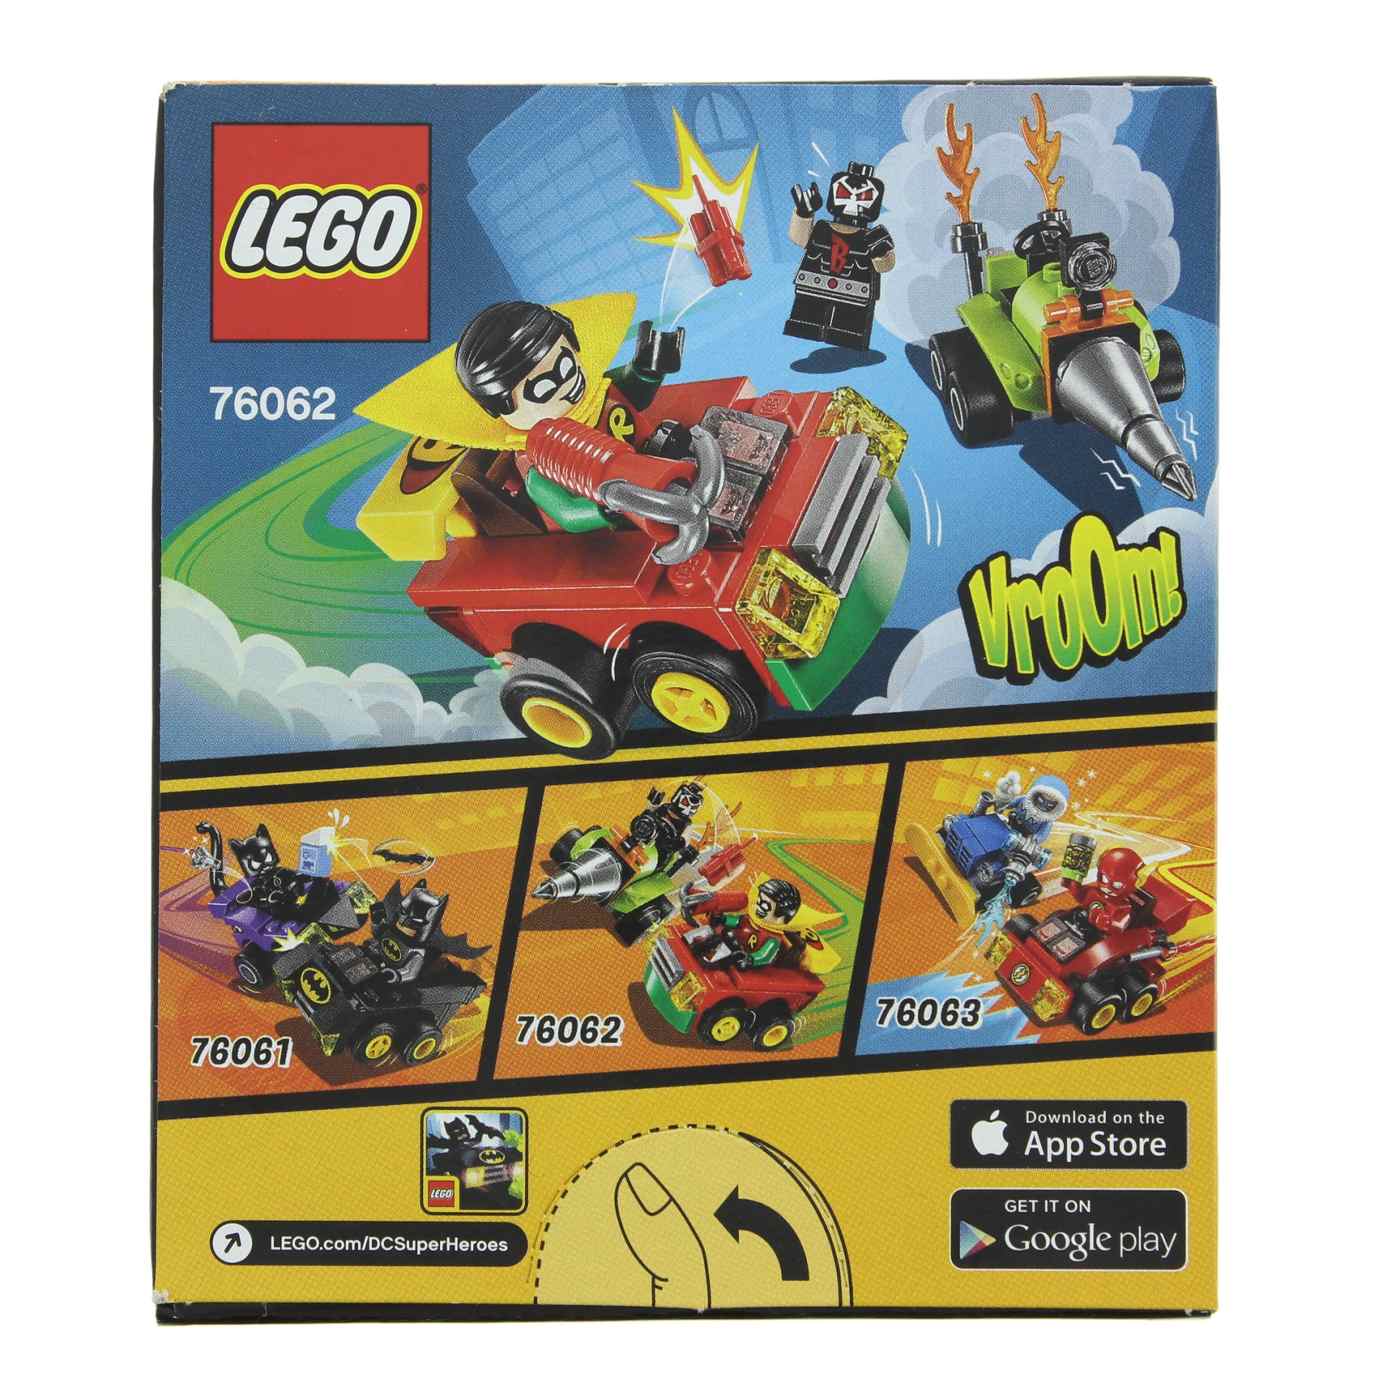 LEGO DC Comics Super Heroes Mighty Micros; image 2 of 2